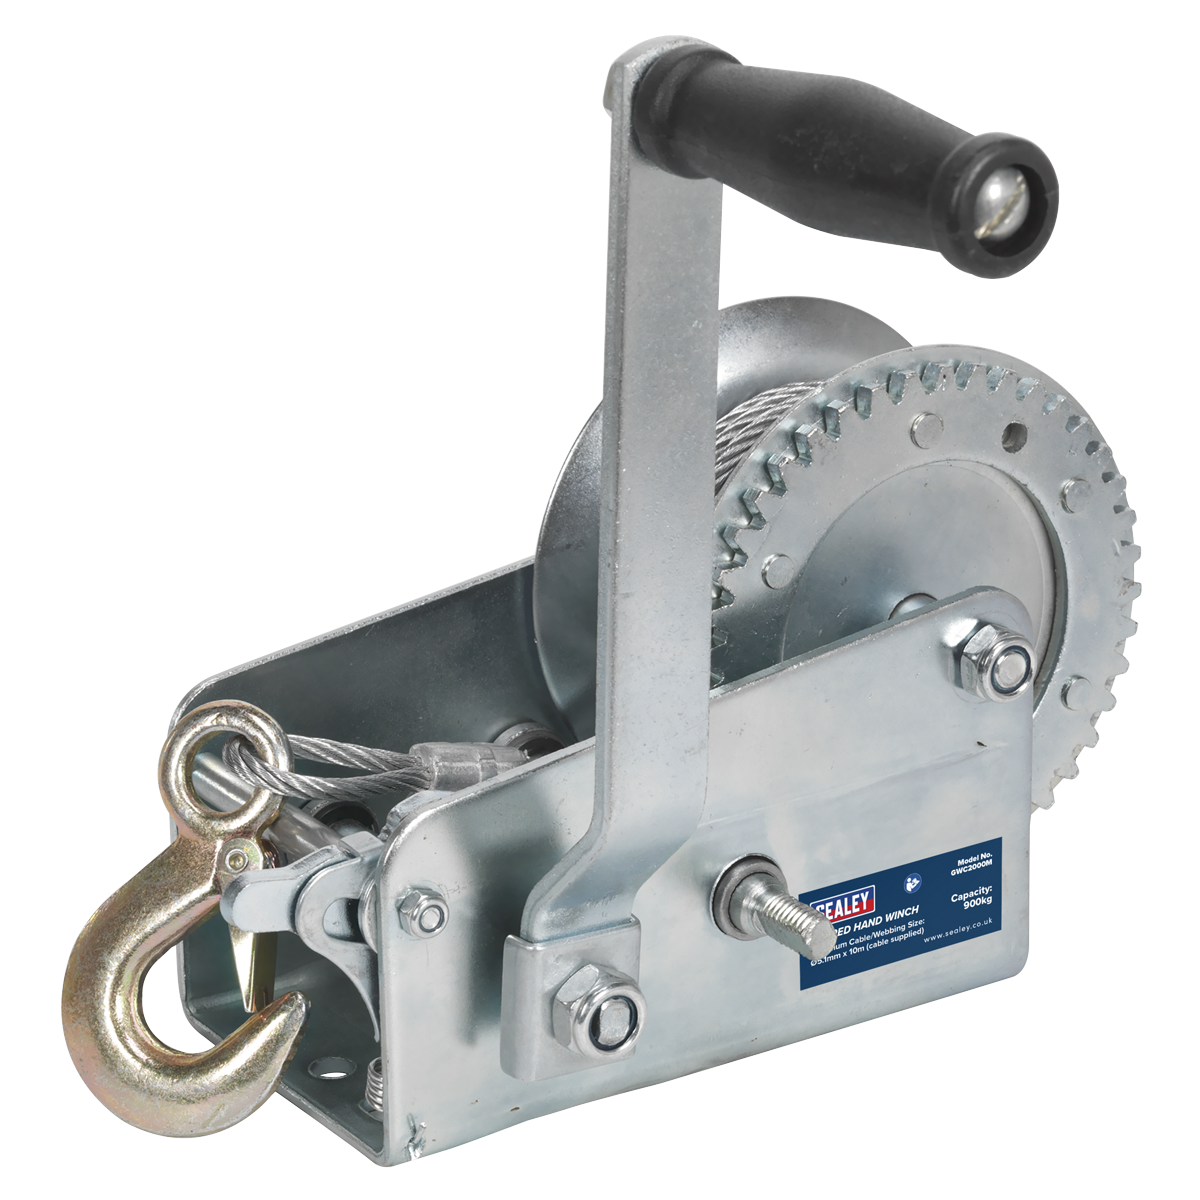 Geared Hand Winch 900kg Capacity with Cable - GWC2000M - Farming Parts